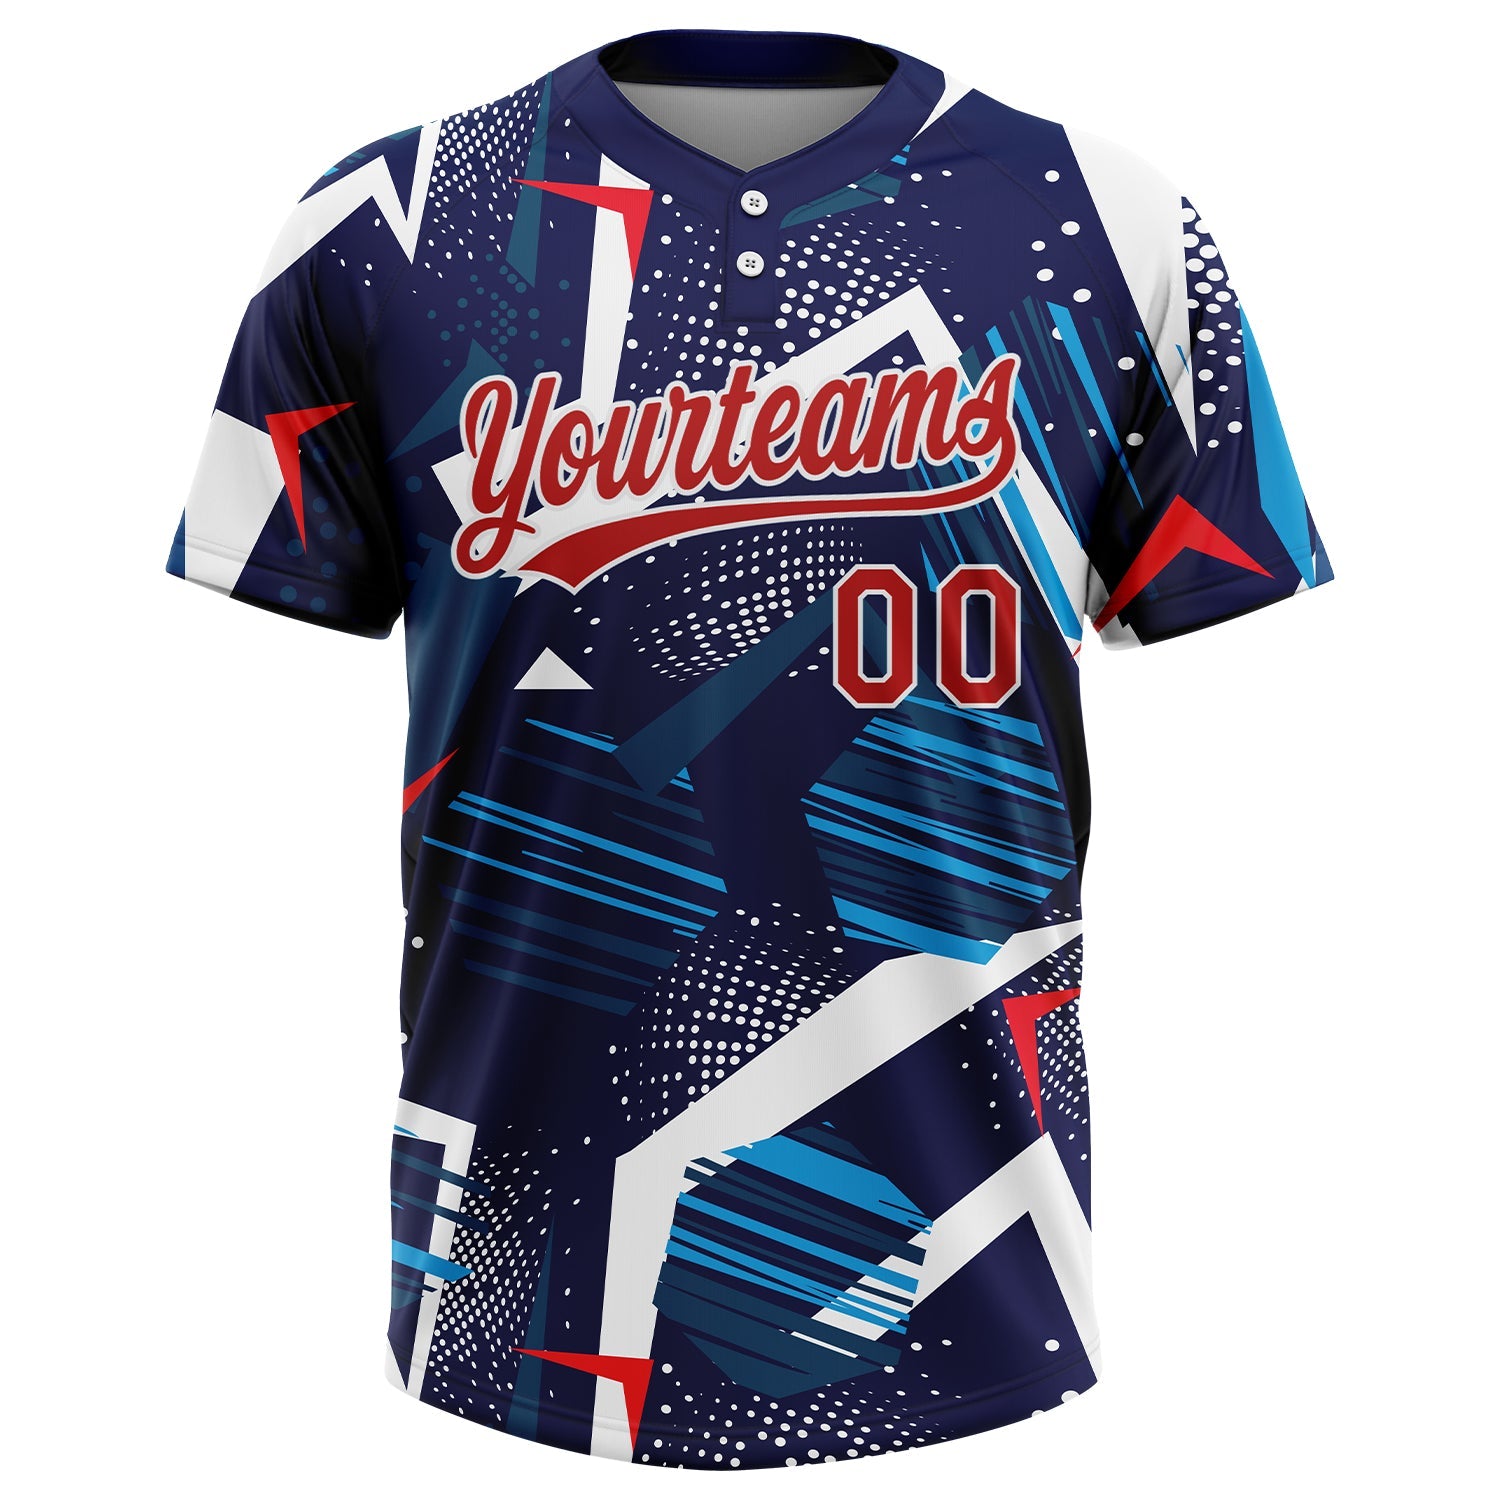 Custom Navy Red-White Two-Button Unisex Softball Jersey Discount – snapmade